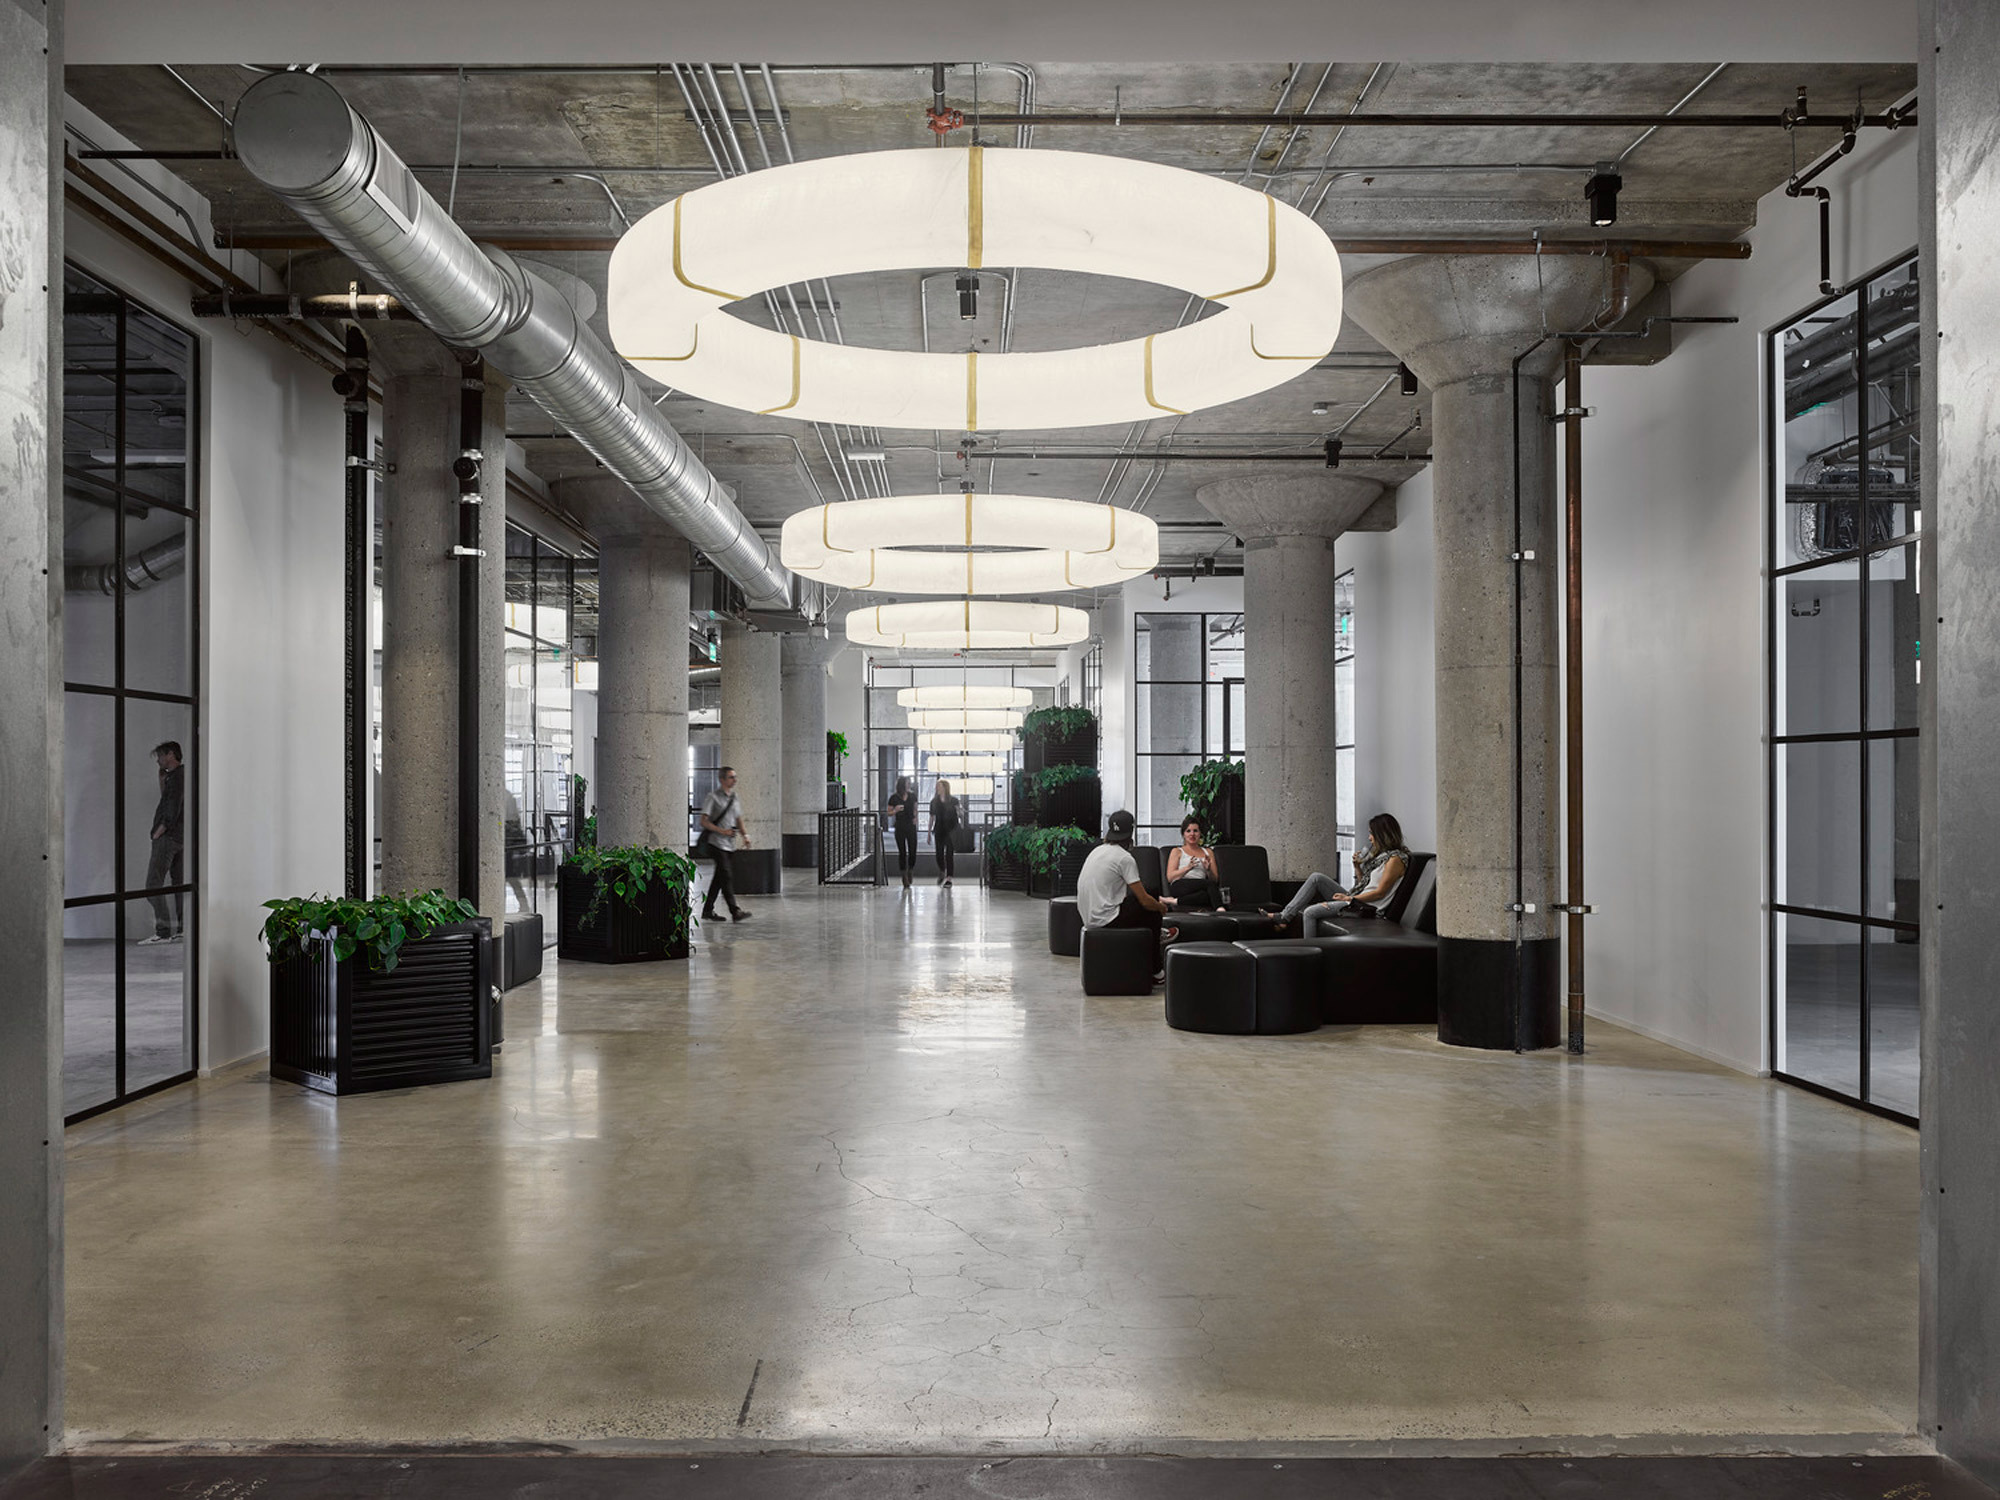 Modern industrial office space with exposed ductwork and concrete floors, enhanced by circular overhead lighting fixtures. Greenspaces with potted plants add vitality, complementing the muted color palette and expansive, open-plan layout promoting collaboration.